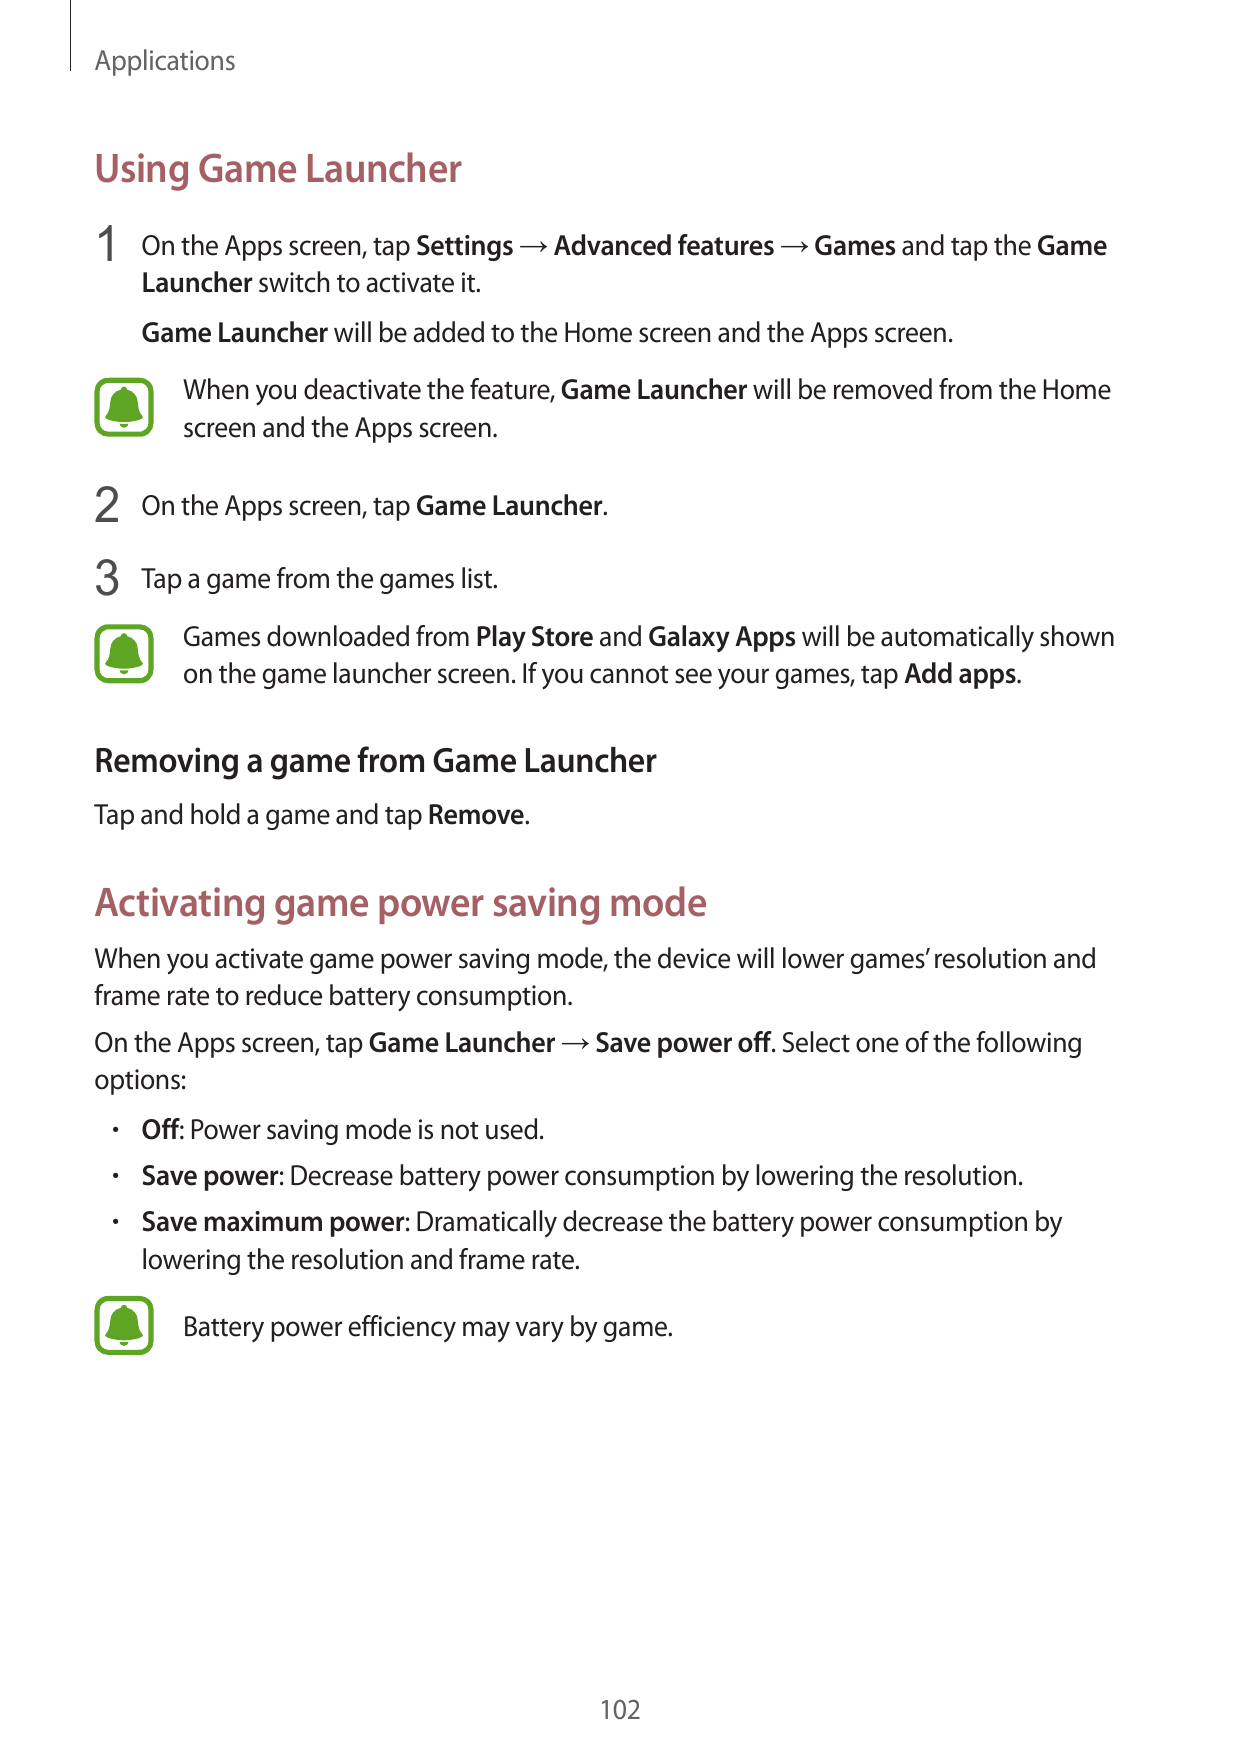 ApplicationsUsing Game Launcher1 On the Apps screen, tap Settings → Advanced features → Games and tap the GameLauncher switch to